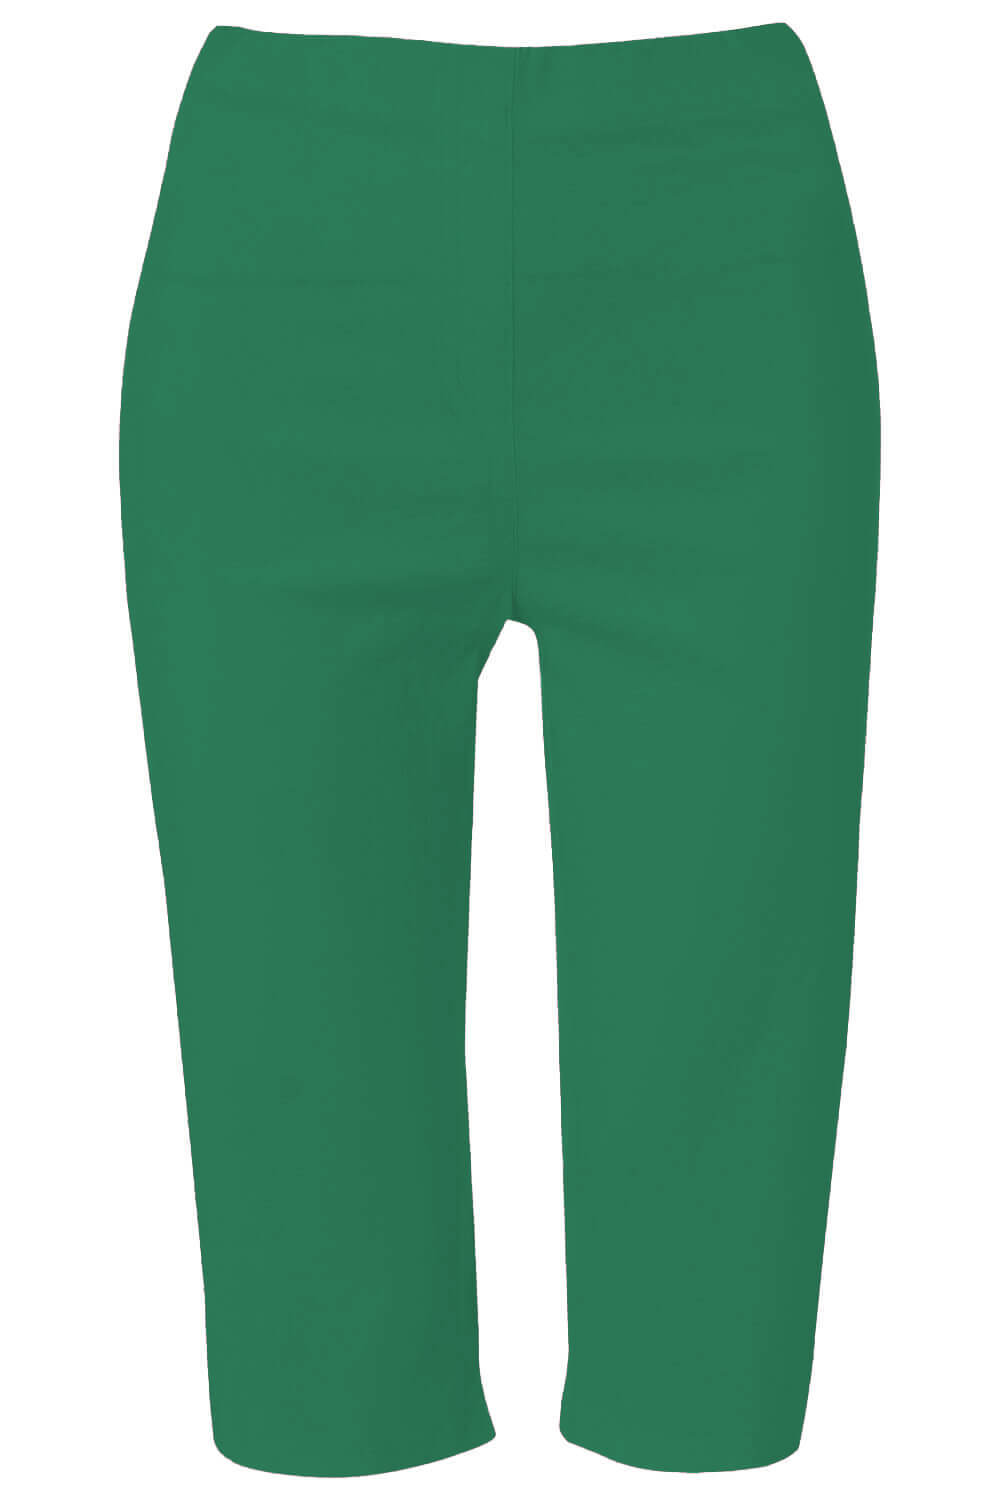 Emerald Stretch Knee Length Shorts, Image 5 of 5